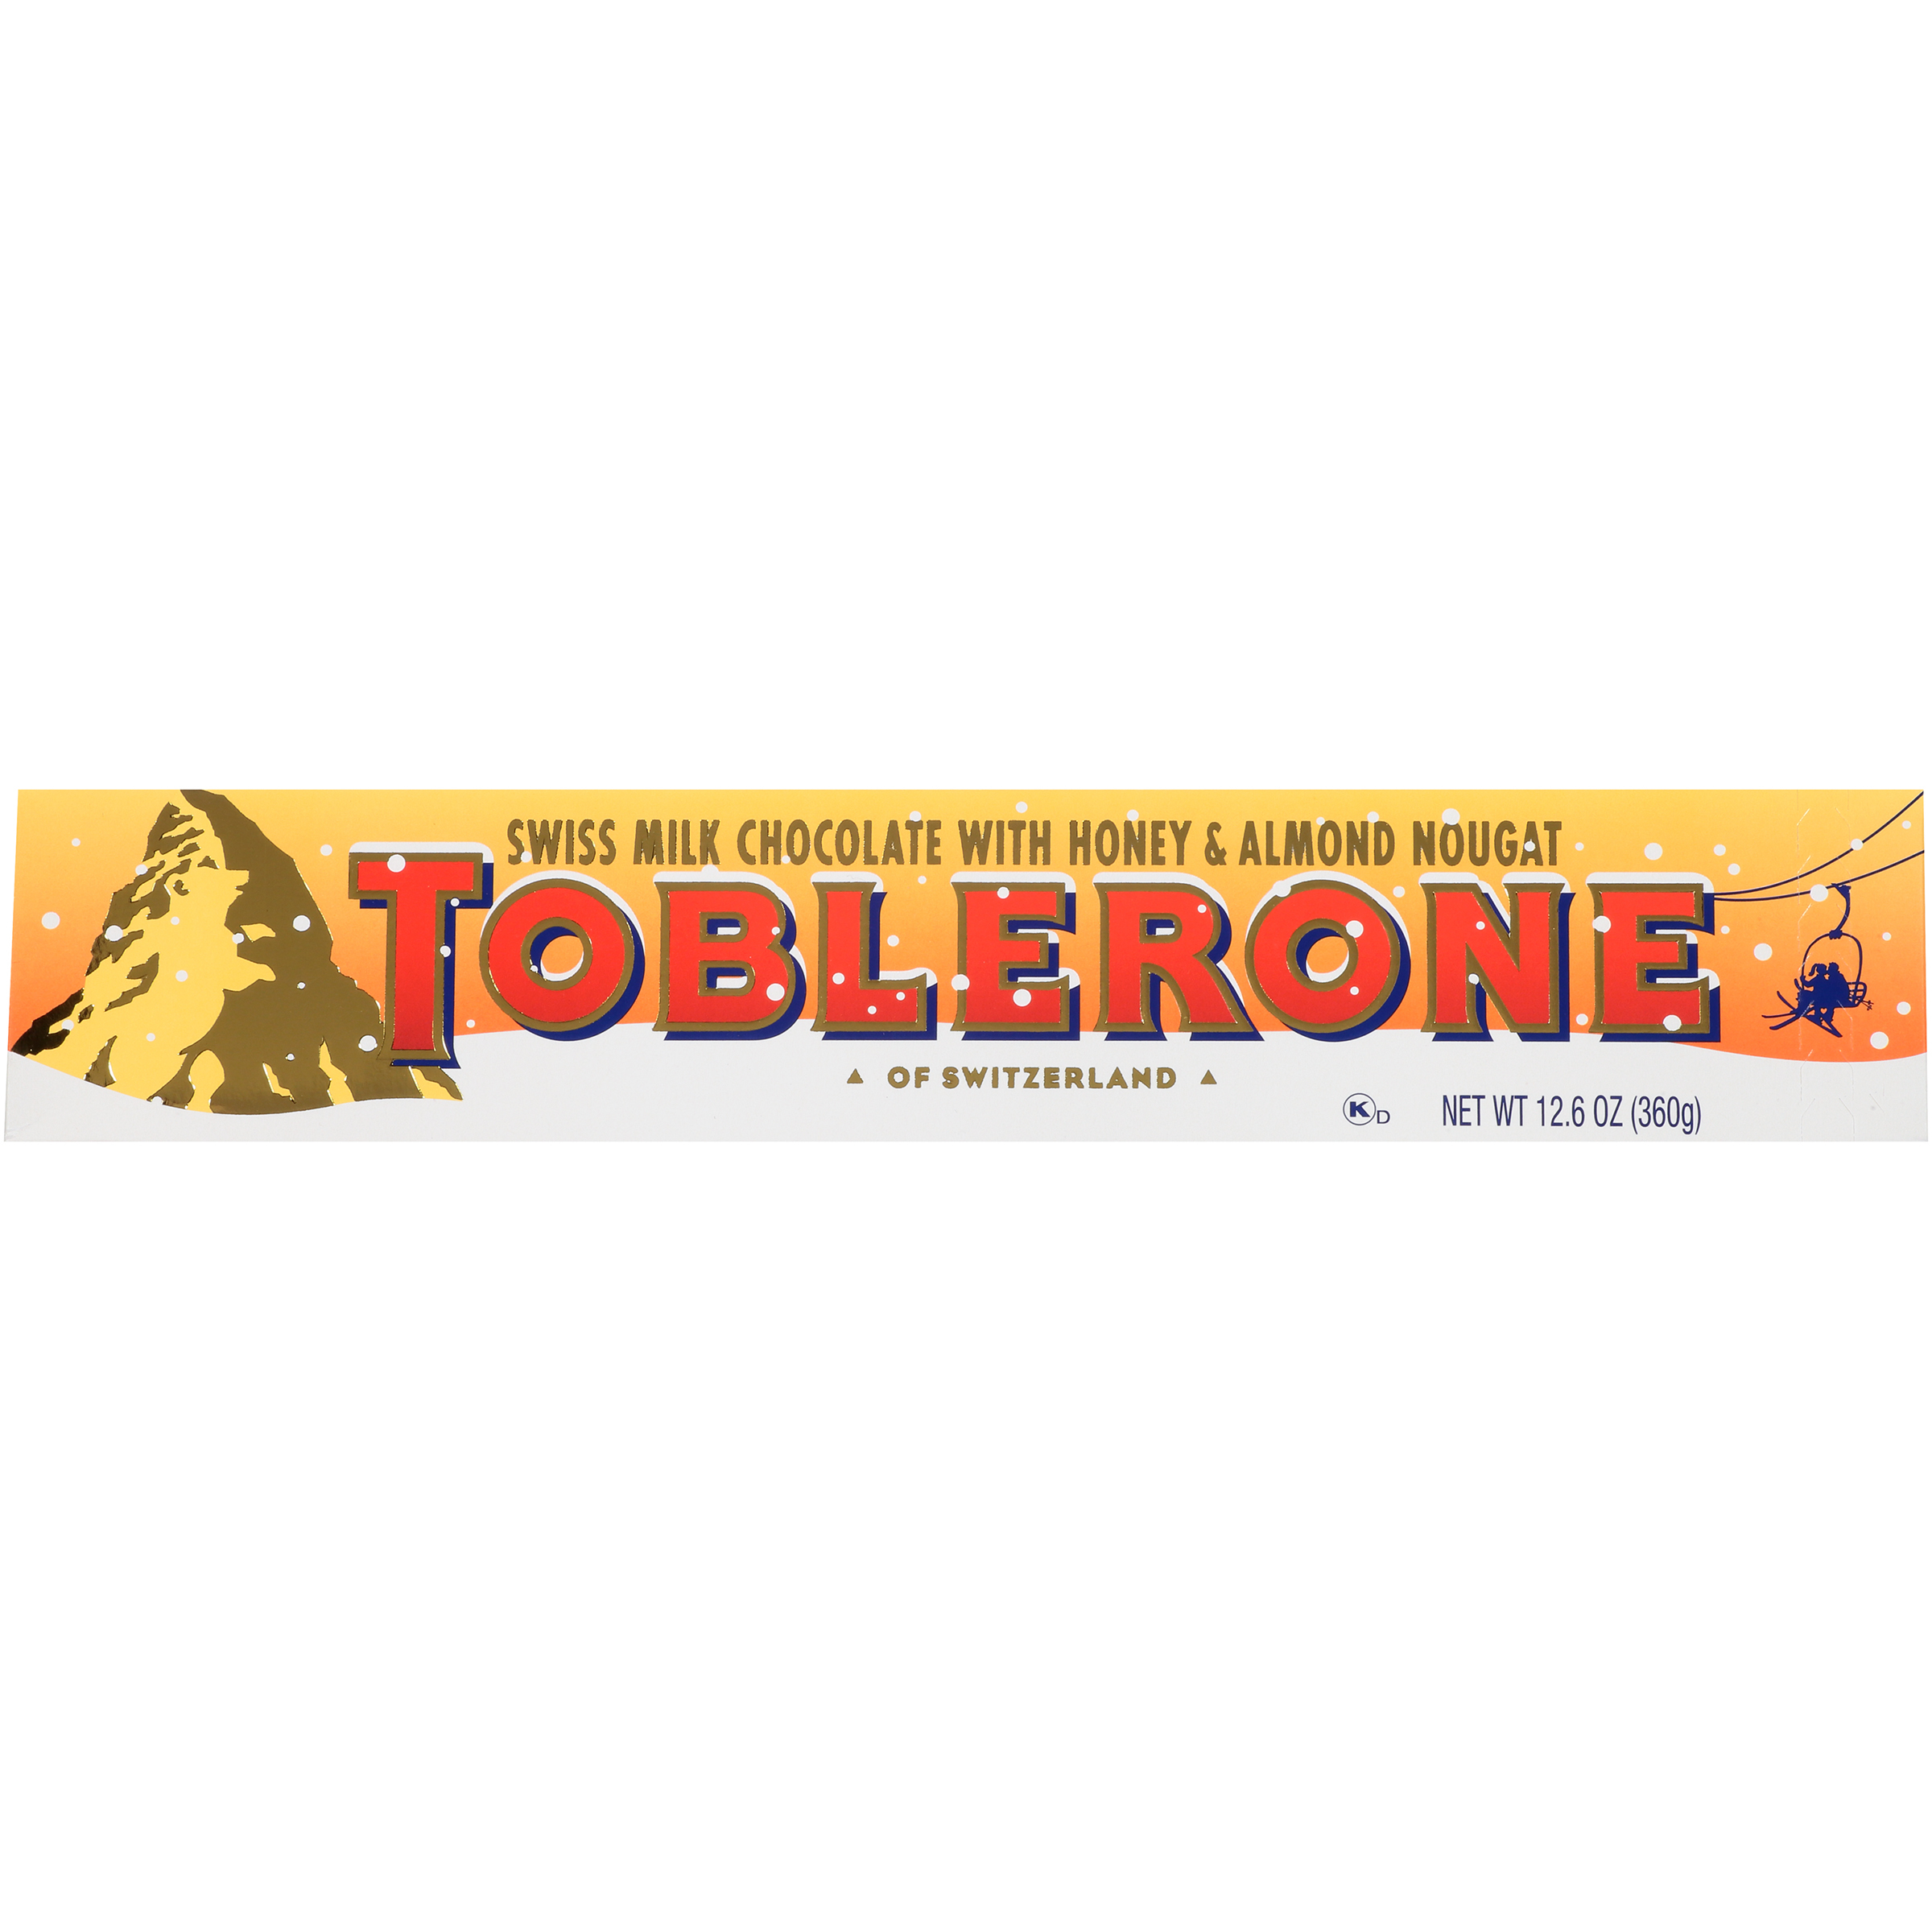 Toblerone Swiss Milk Chocolate with Honey & Almond Nougat, Holiday Chocolate Candy, 10 - 12.6 oz Bars-thumbnail-1